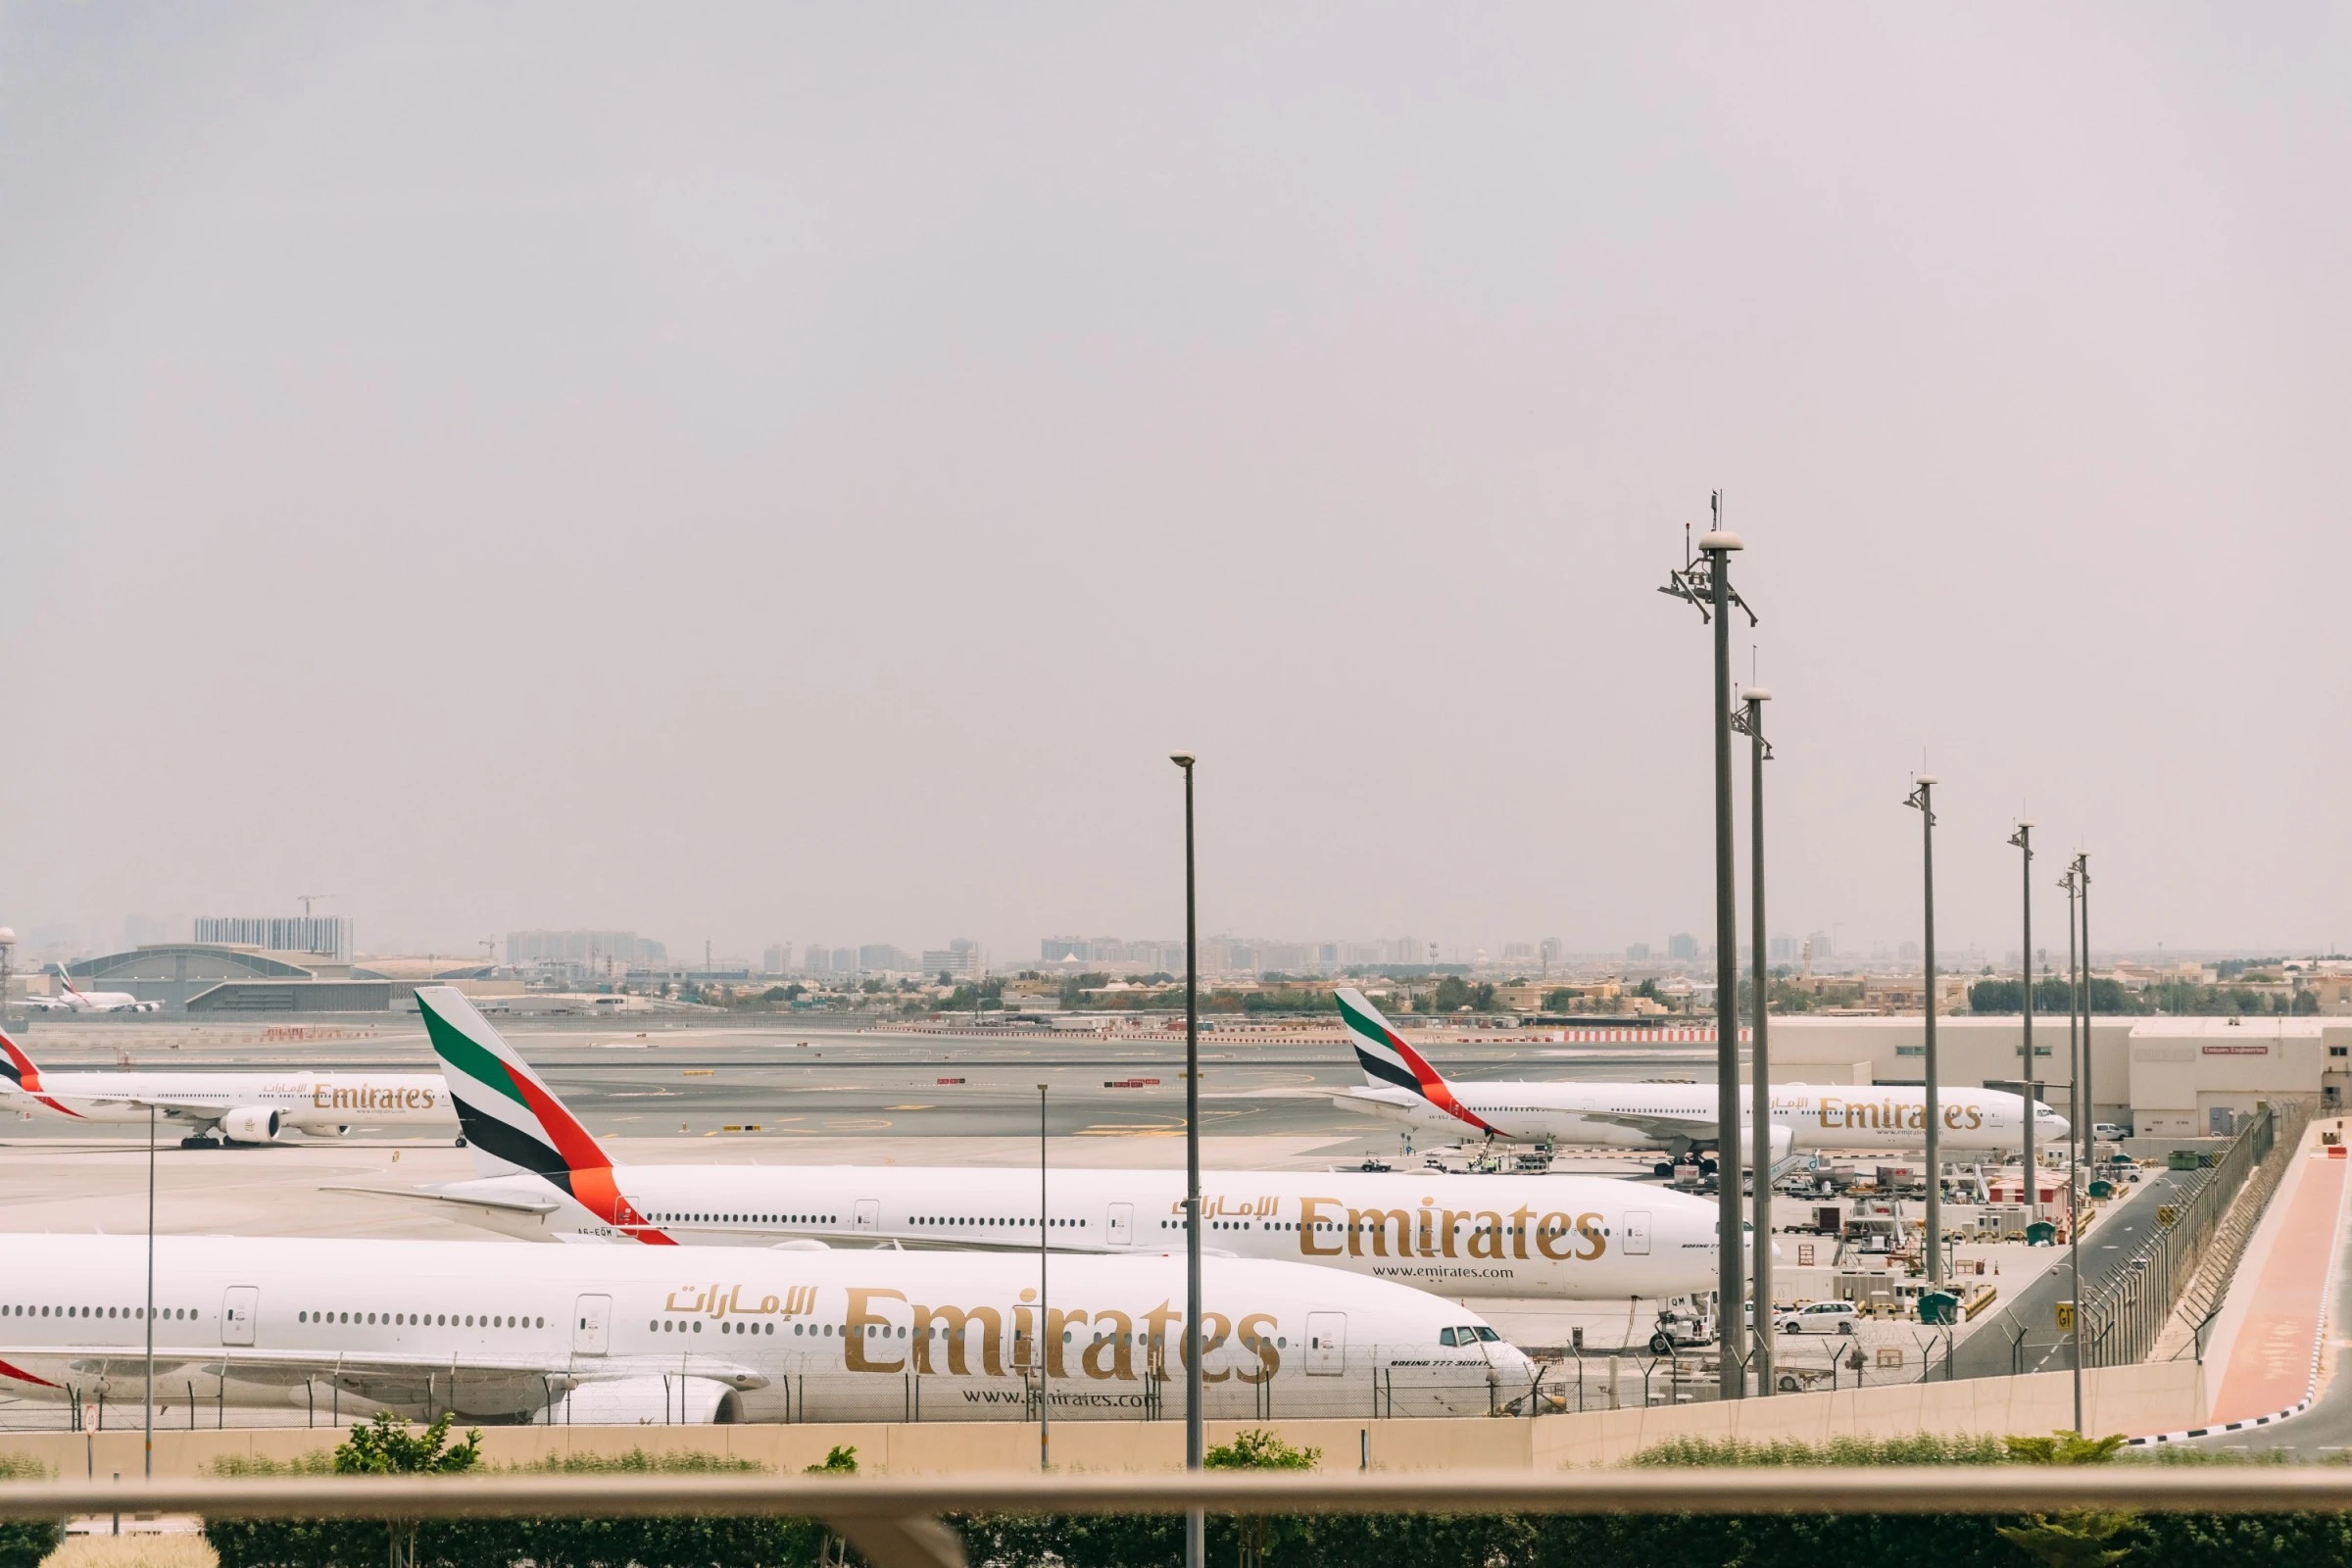 10 Amazing Facts About Dubai’s Airports You Probably Did Not Know